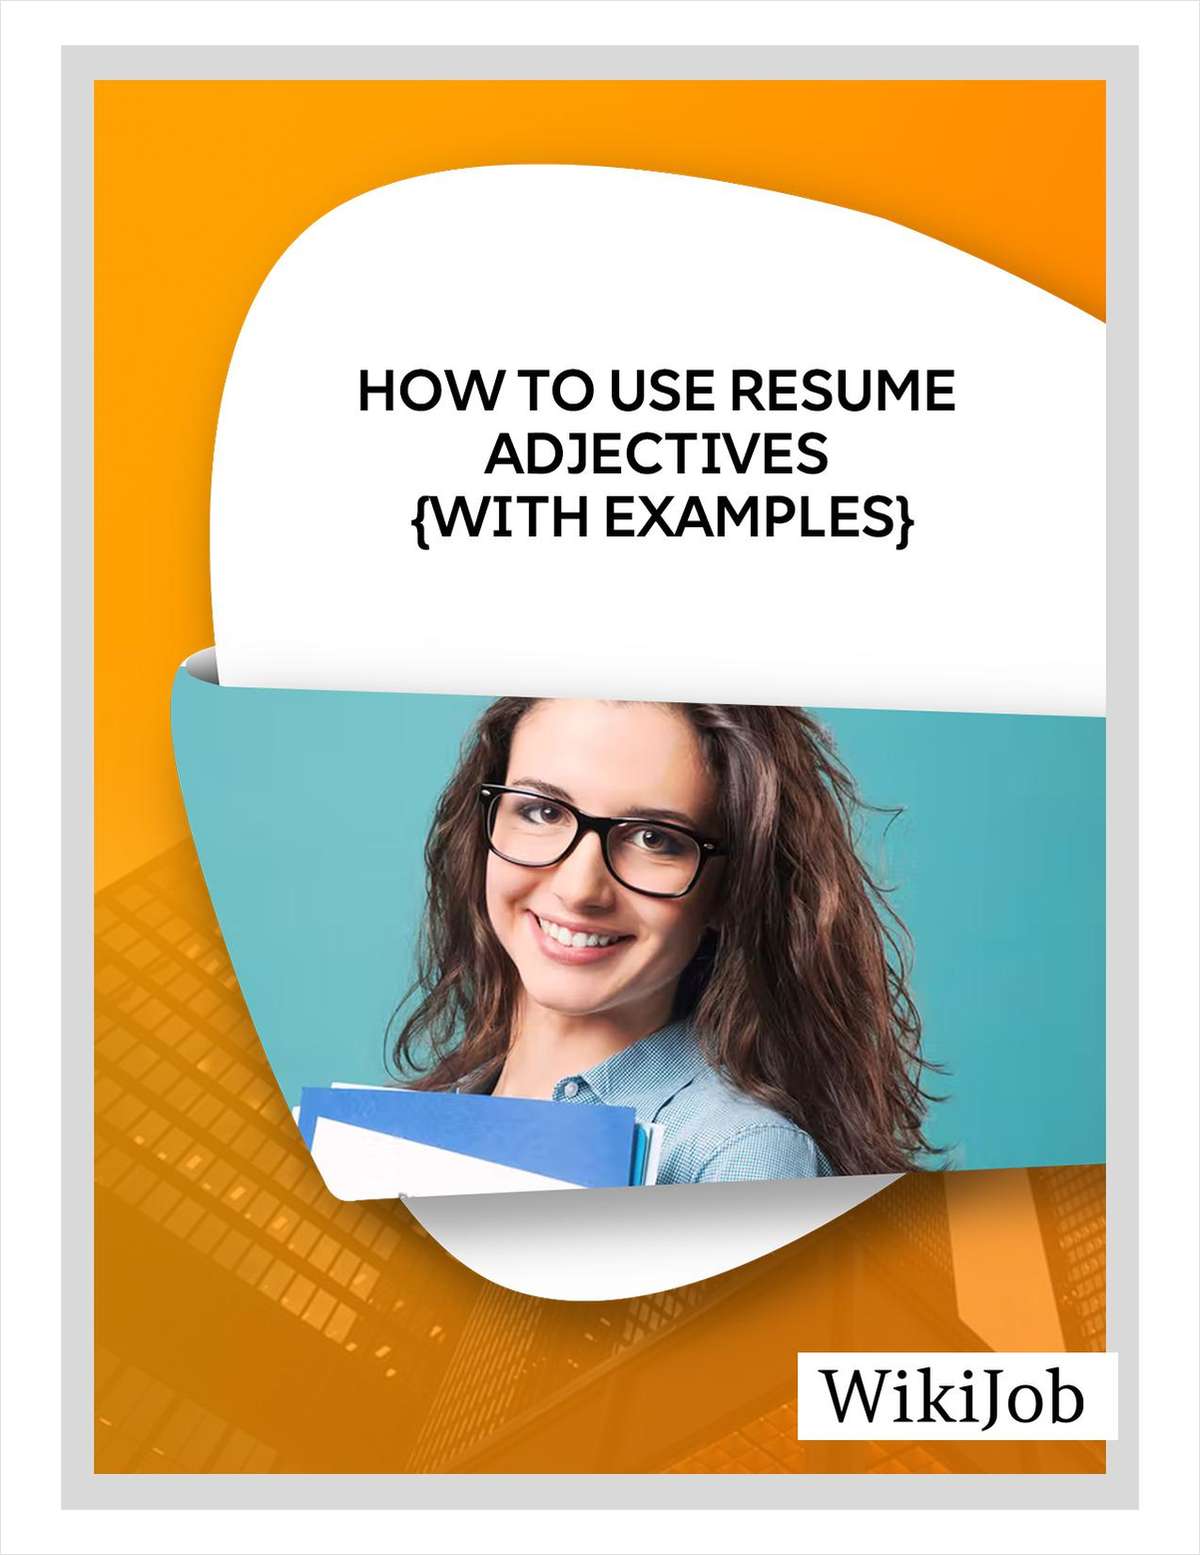 How to Use Resume Adjectives (With Examples)